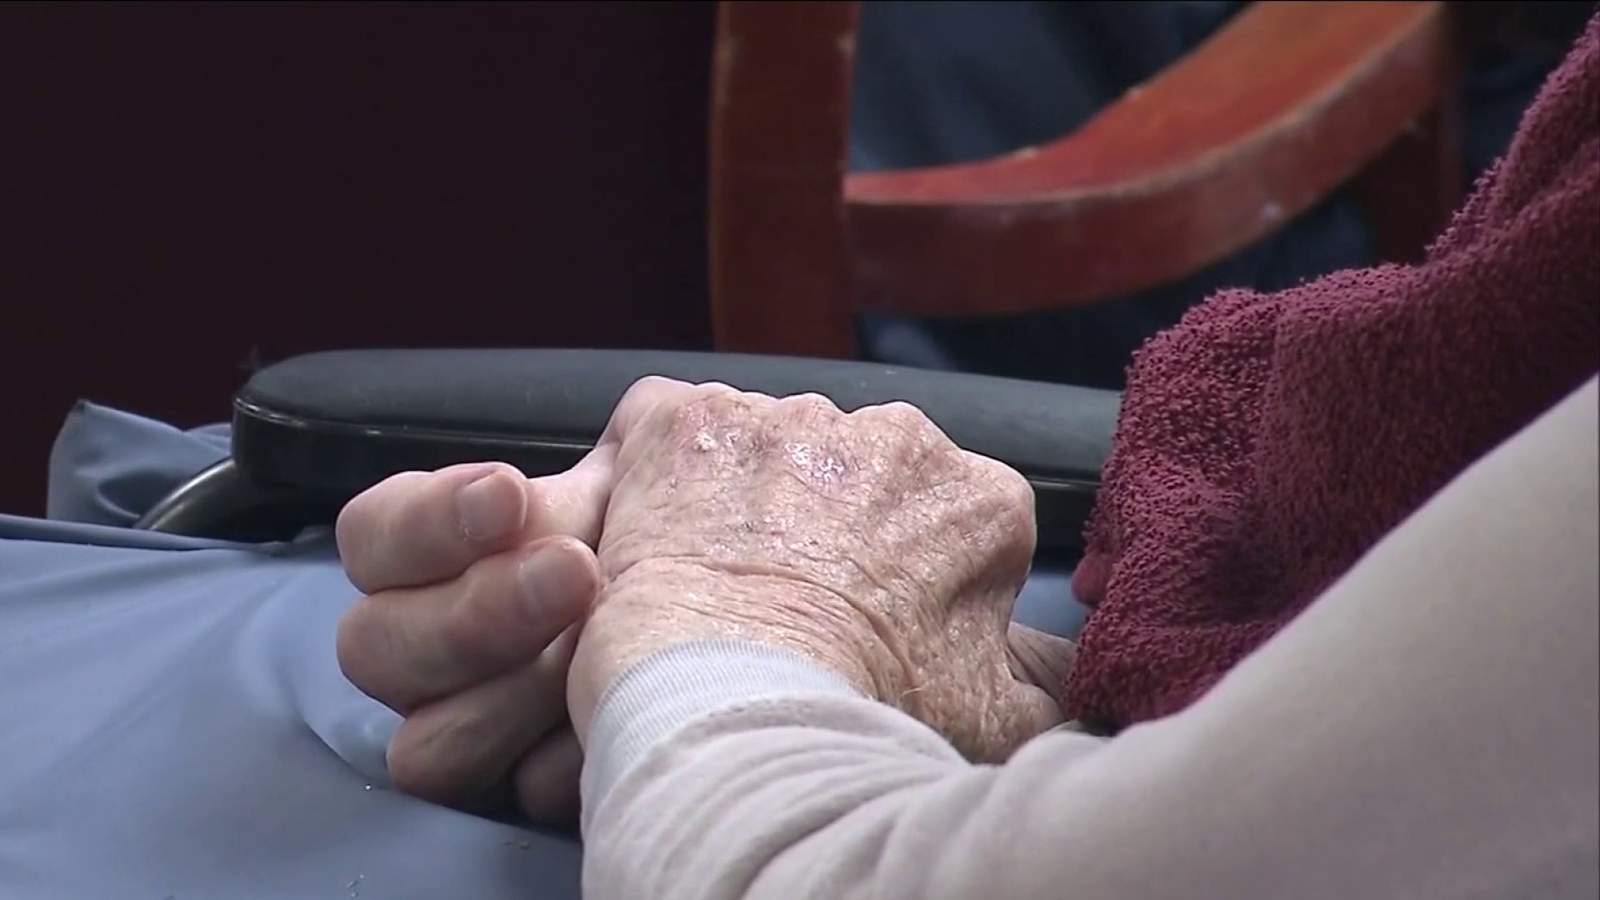 Dozens sick in COVID-19 outbreaks reported at 2 Houston-area nursing homes, officials say